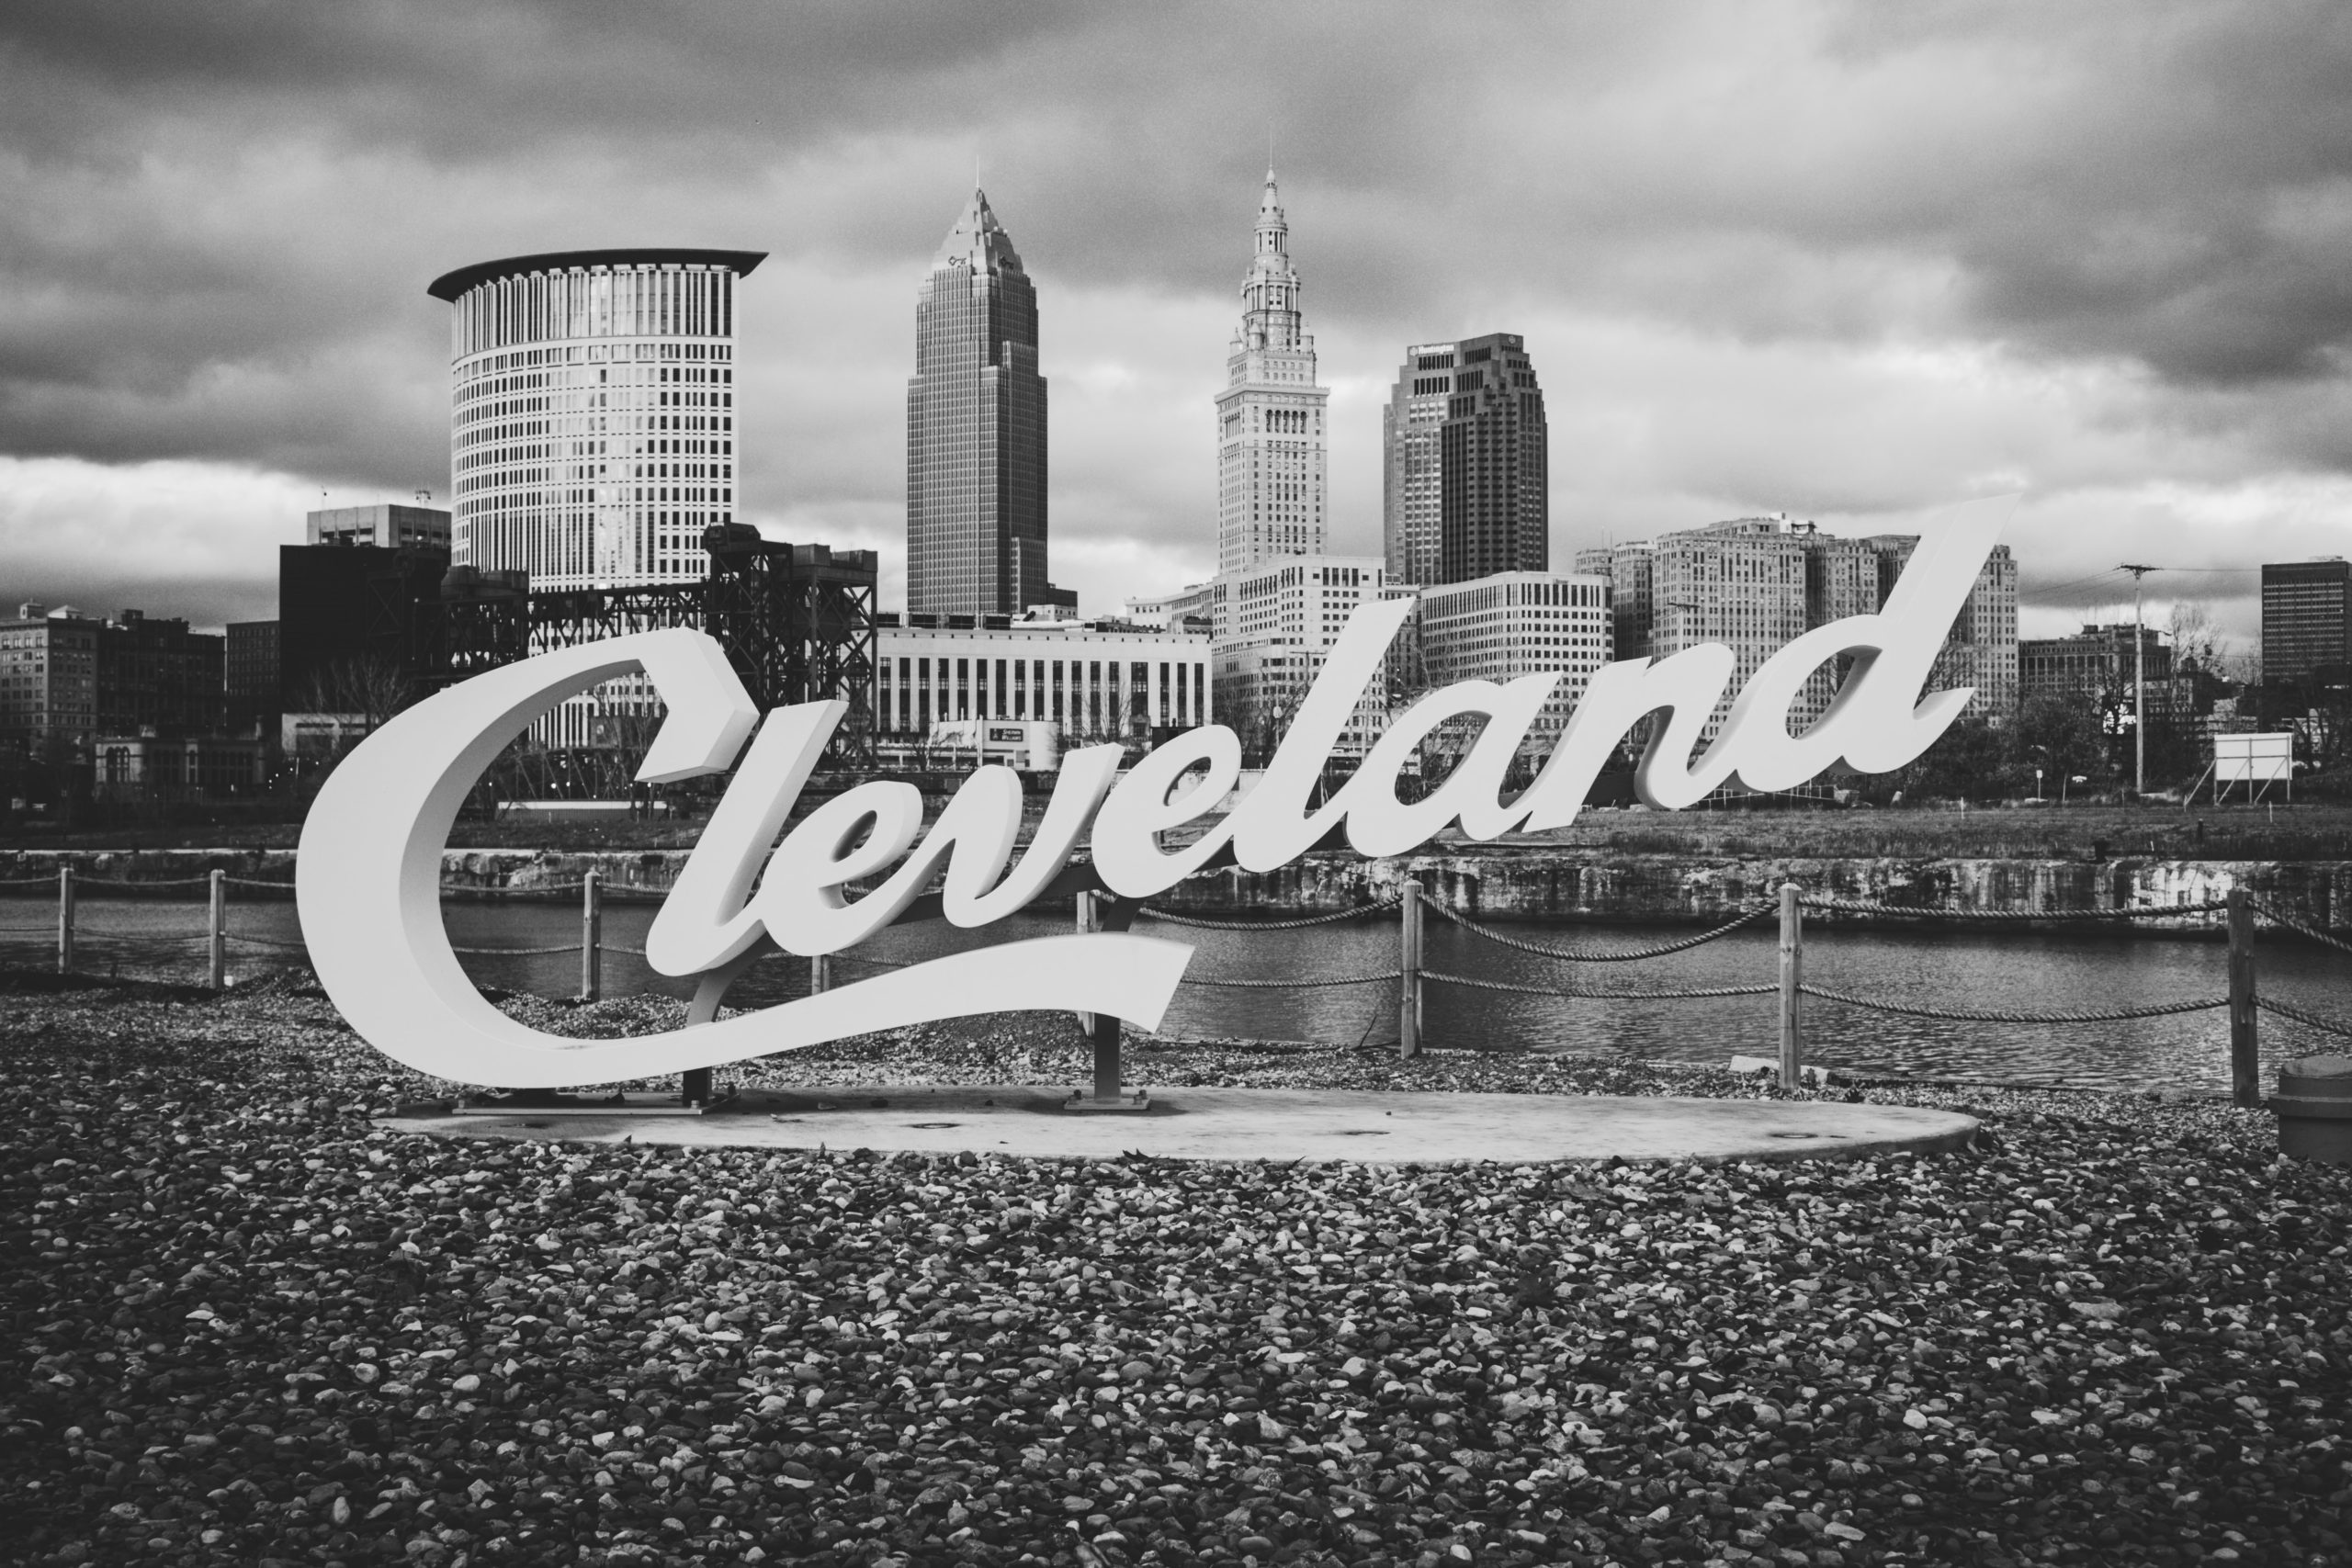 Finding a Job in Cleveland Ohio